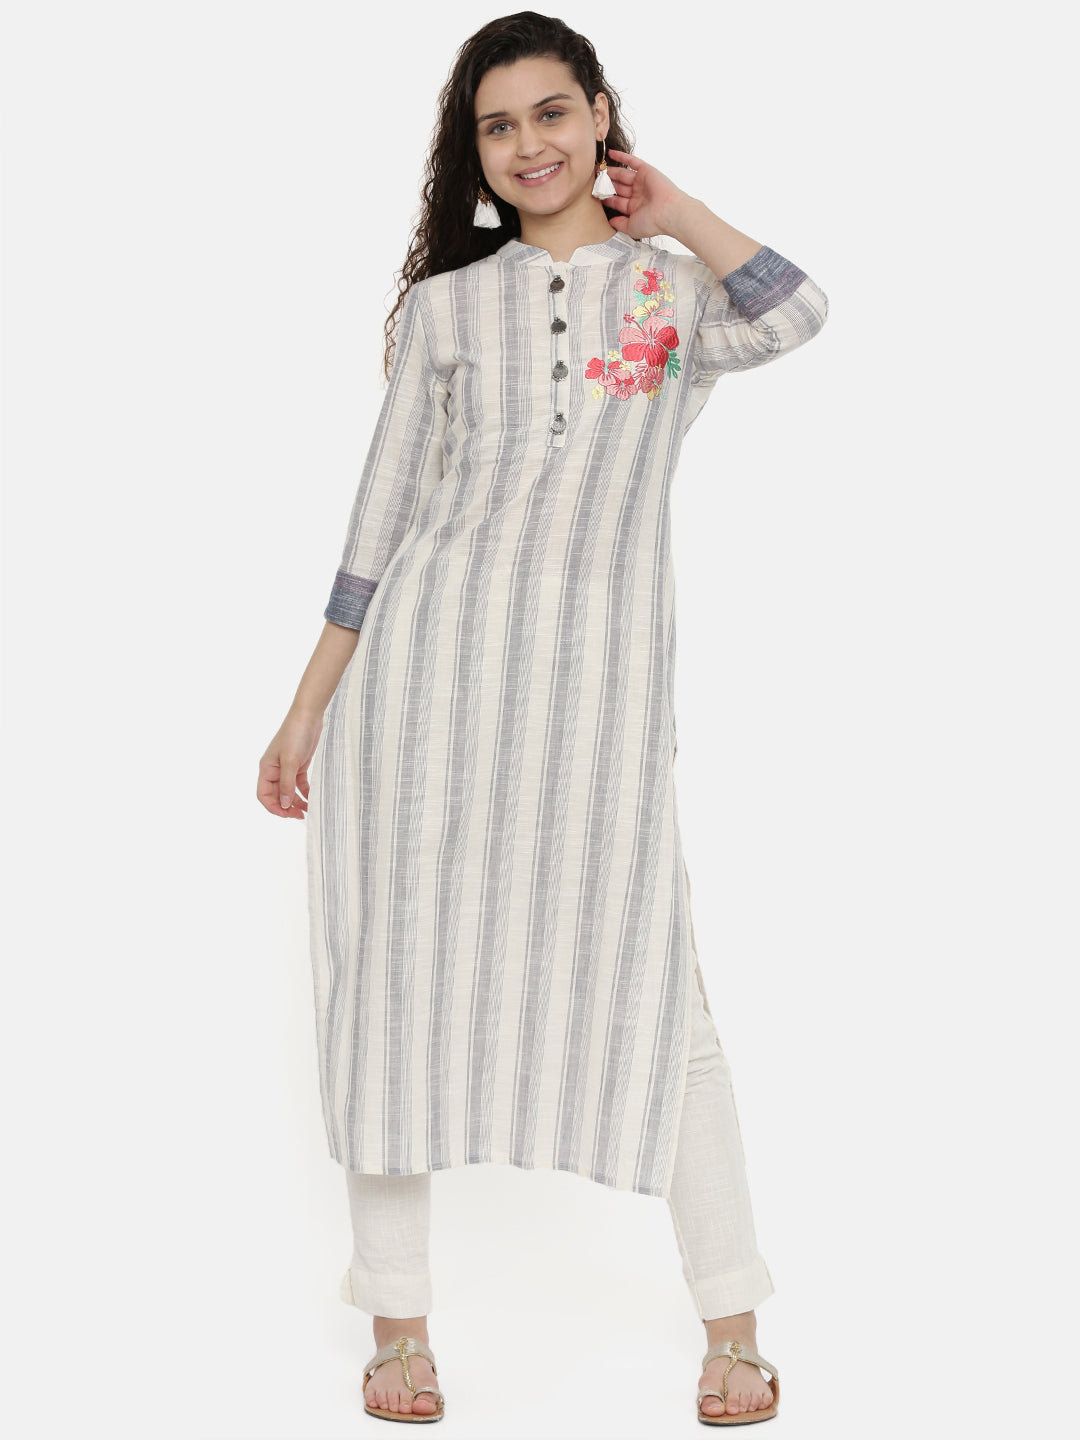 Neerus Women Grey  Off-White Striped Straight Kurta With Floral Embroidery Detail